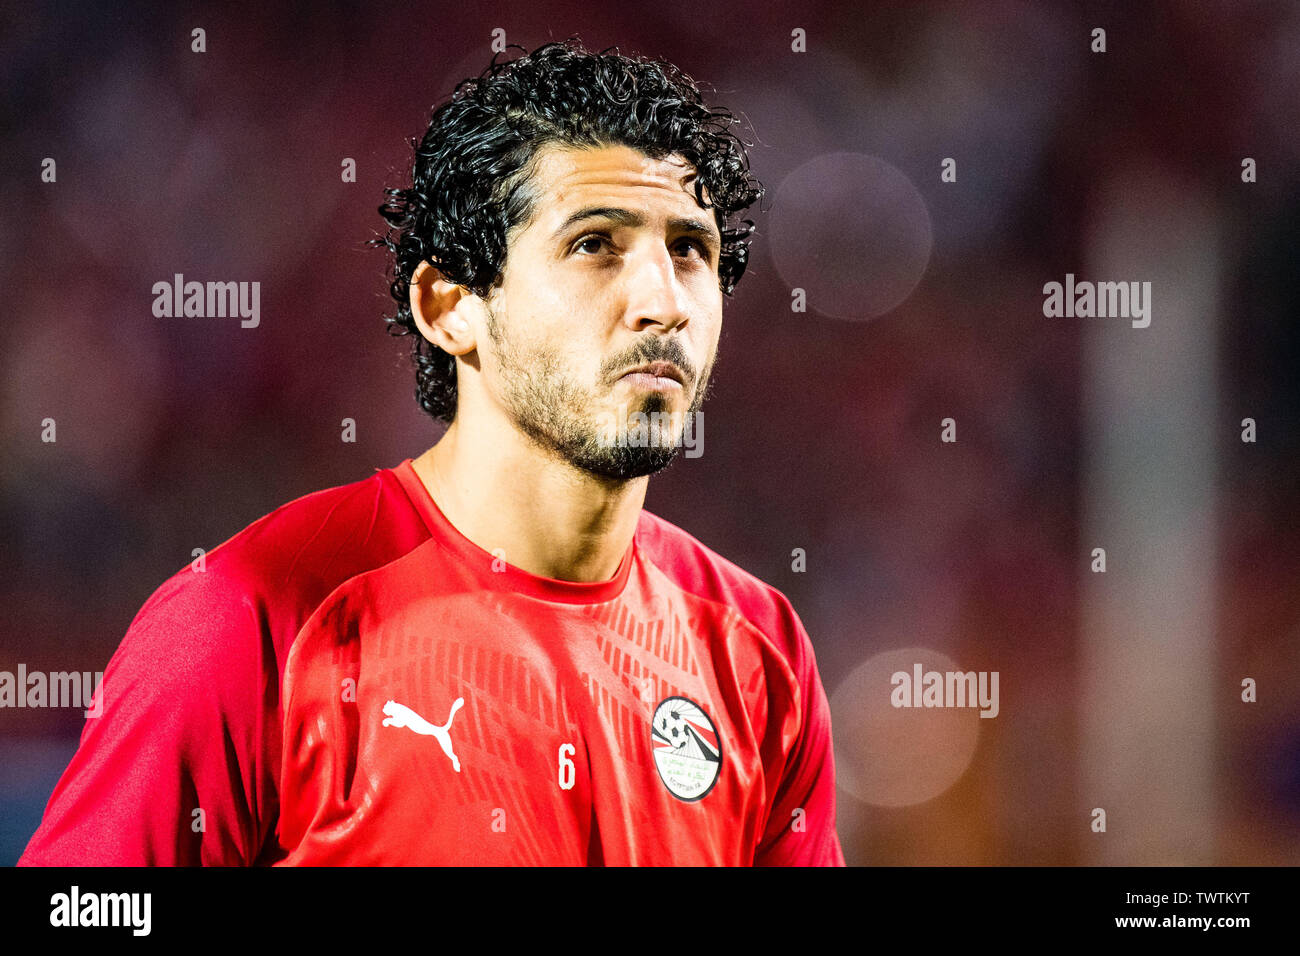 CAIRO, EGYPT - JUNE 21: Ahmed Hegazy of Egypt looks on during the 2019 Africa Cup of Nations Group A match between Egypt and Zimbabwe at Cairo International Stadium on June 21, 2019 in Cairo, Egypt. (Photo by Sebastian Frej/MB Media) Stock Photo